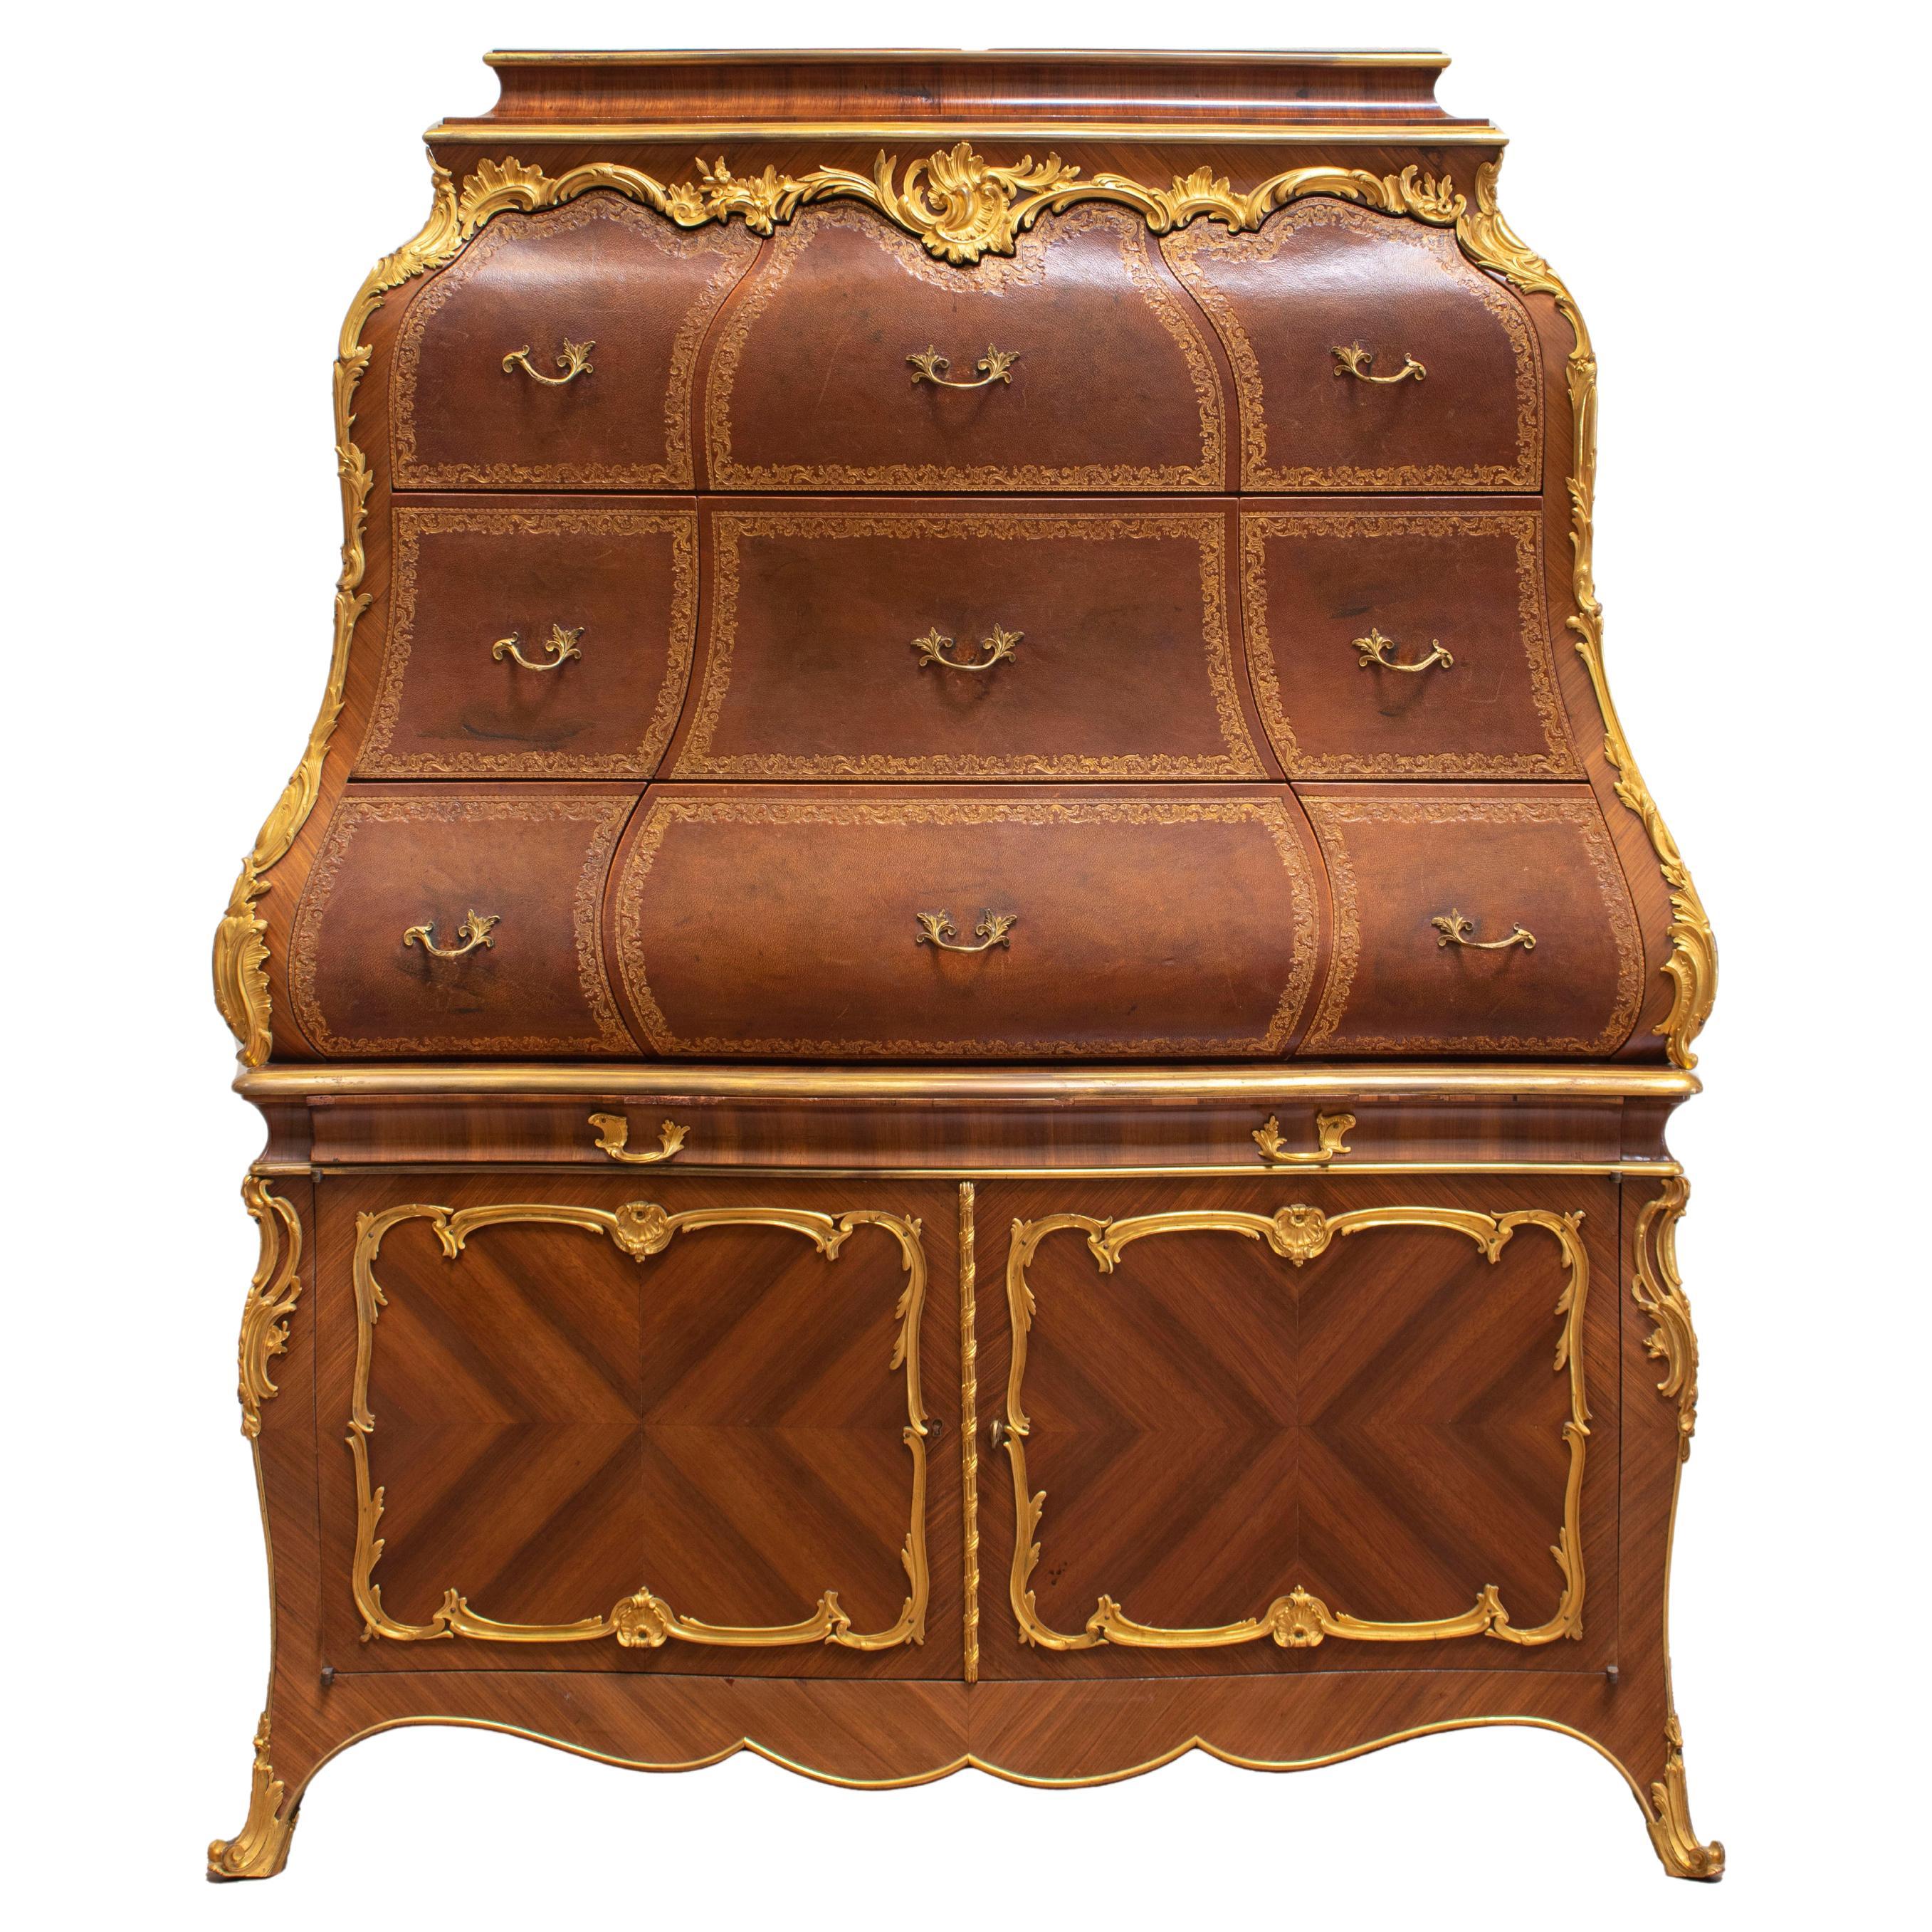 Late 19th Century French Ormolu Mounted Marquetry Cabinet by Henry Dasson For Sale